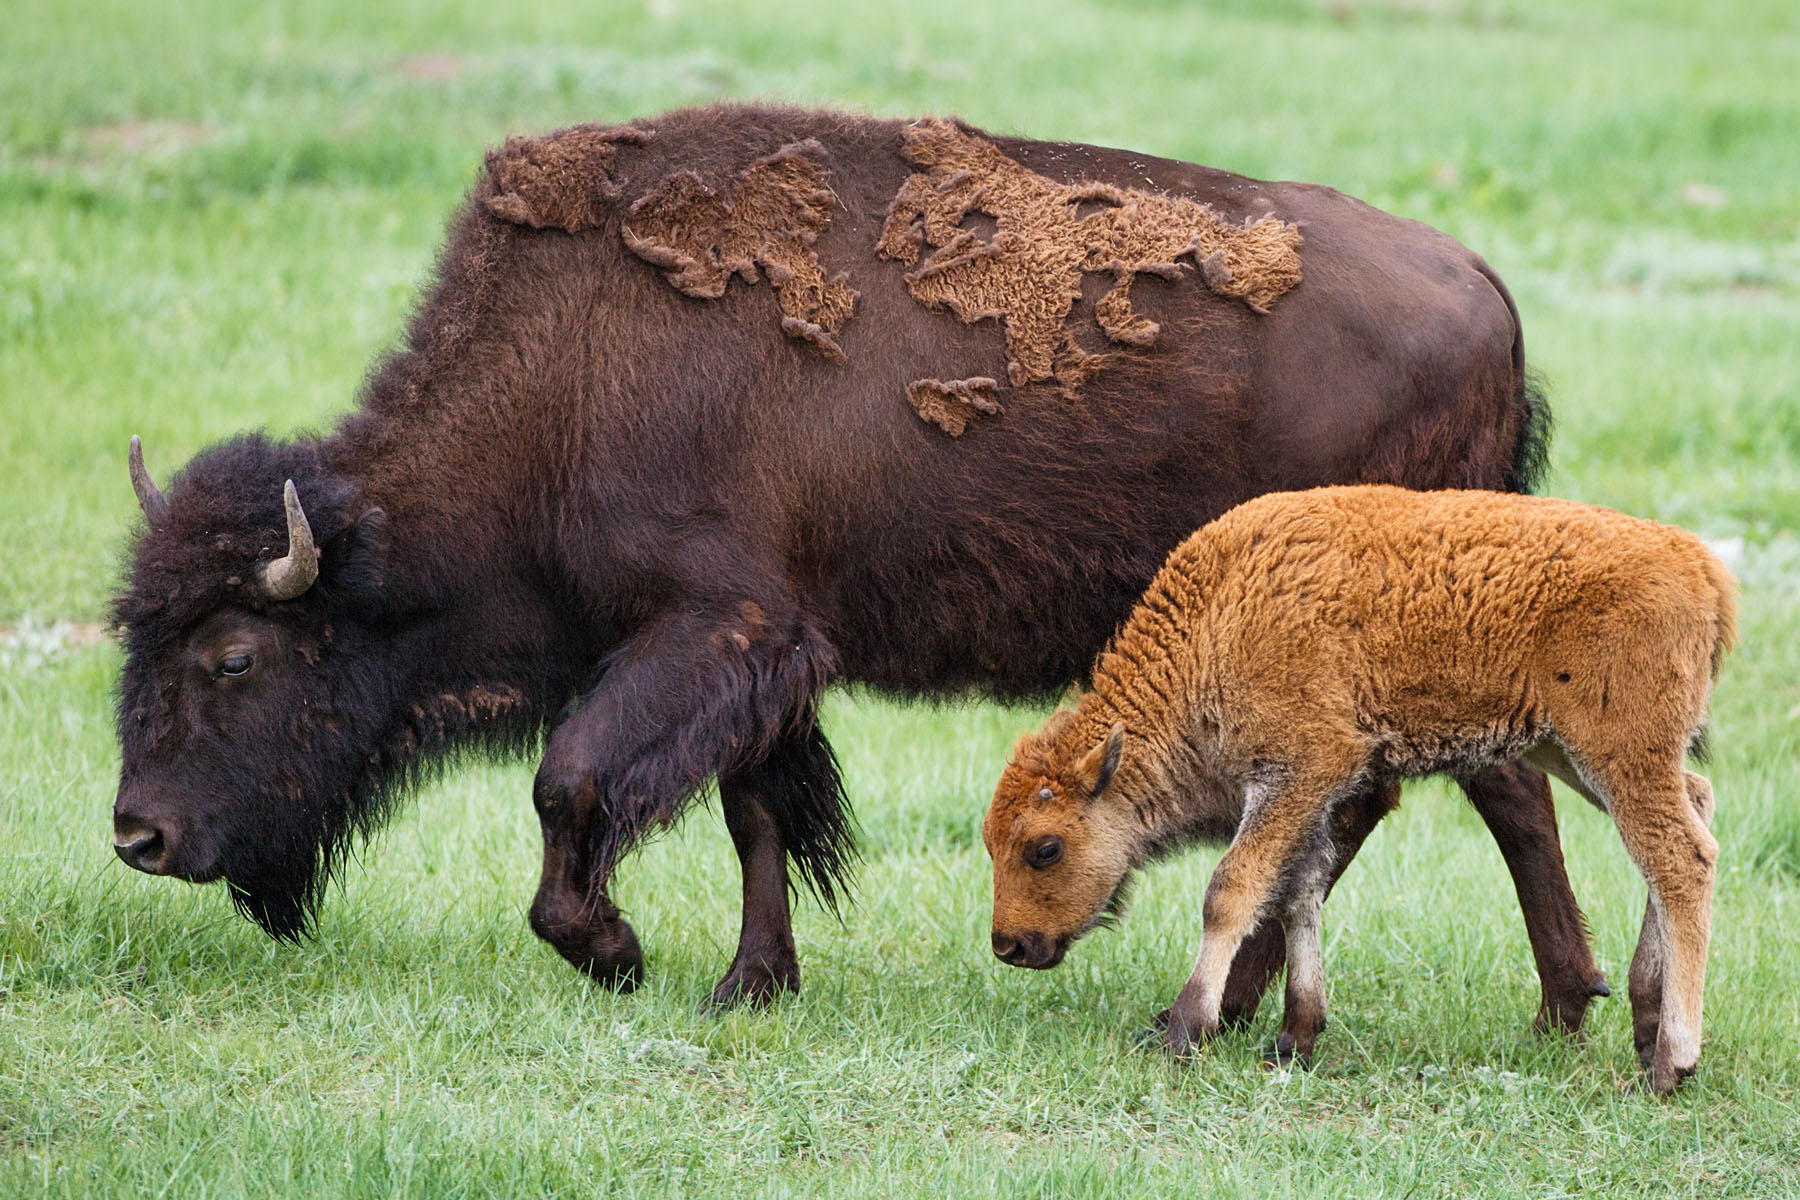 Bison mother and calf, Custer State Park, South Dakota.  Click for next photo.